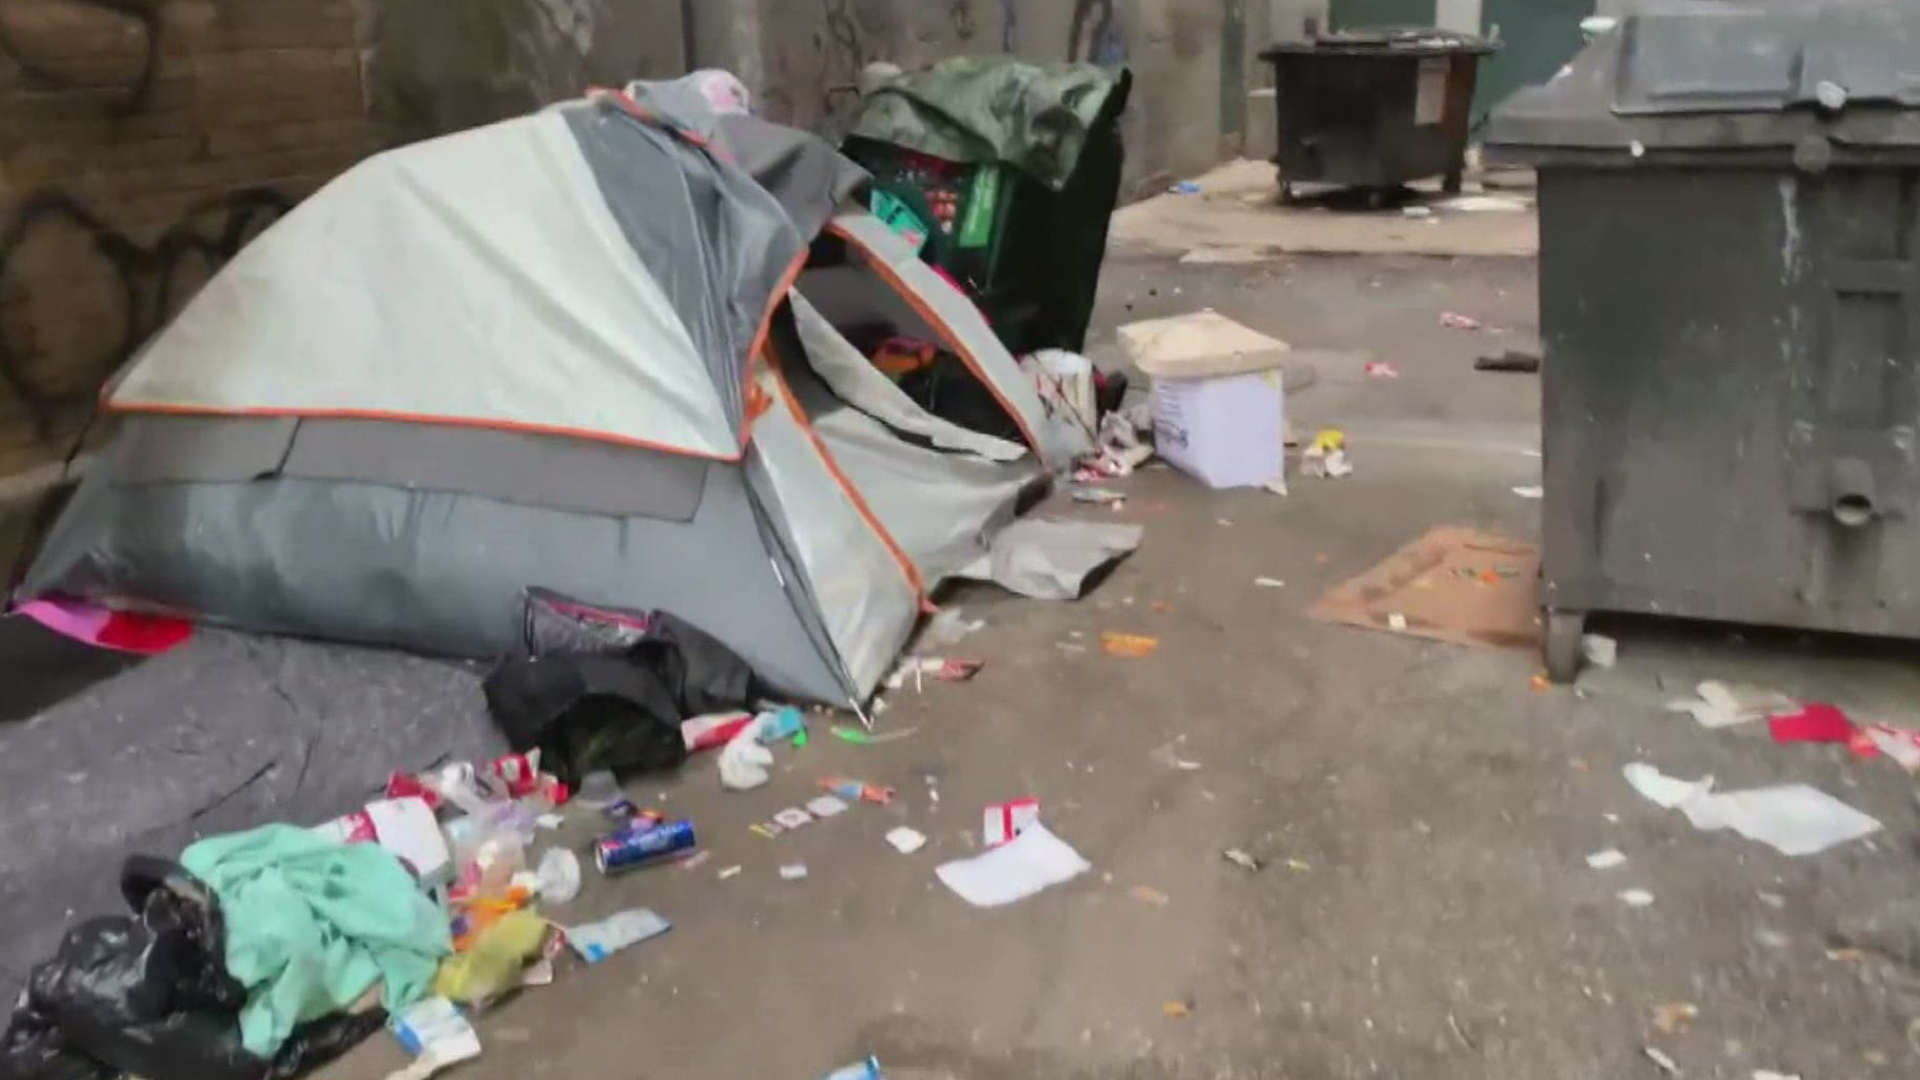 The city's been dealing with growing concerns about the number of homeless people living and sleeping in the heart of downtown.